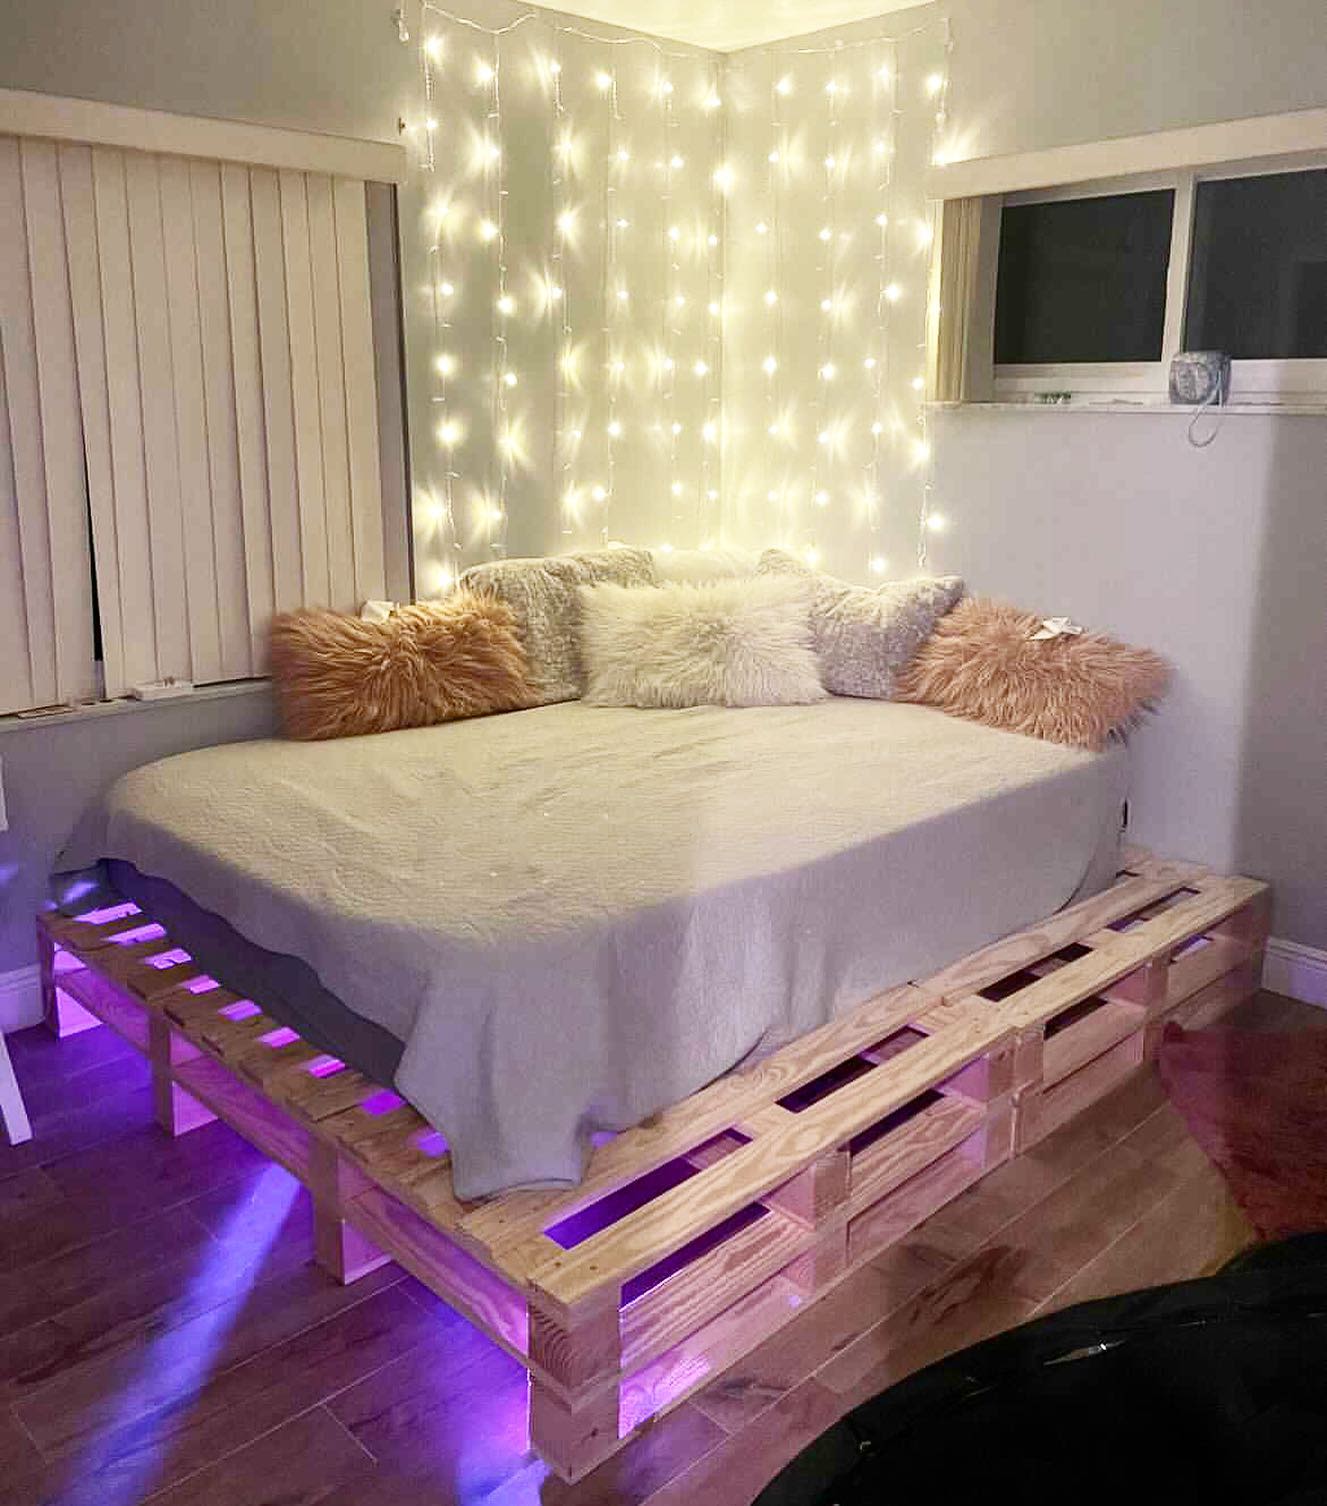 How to build a pallet bed